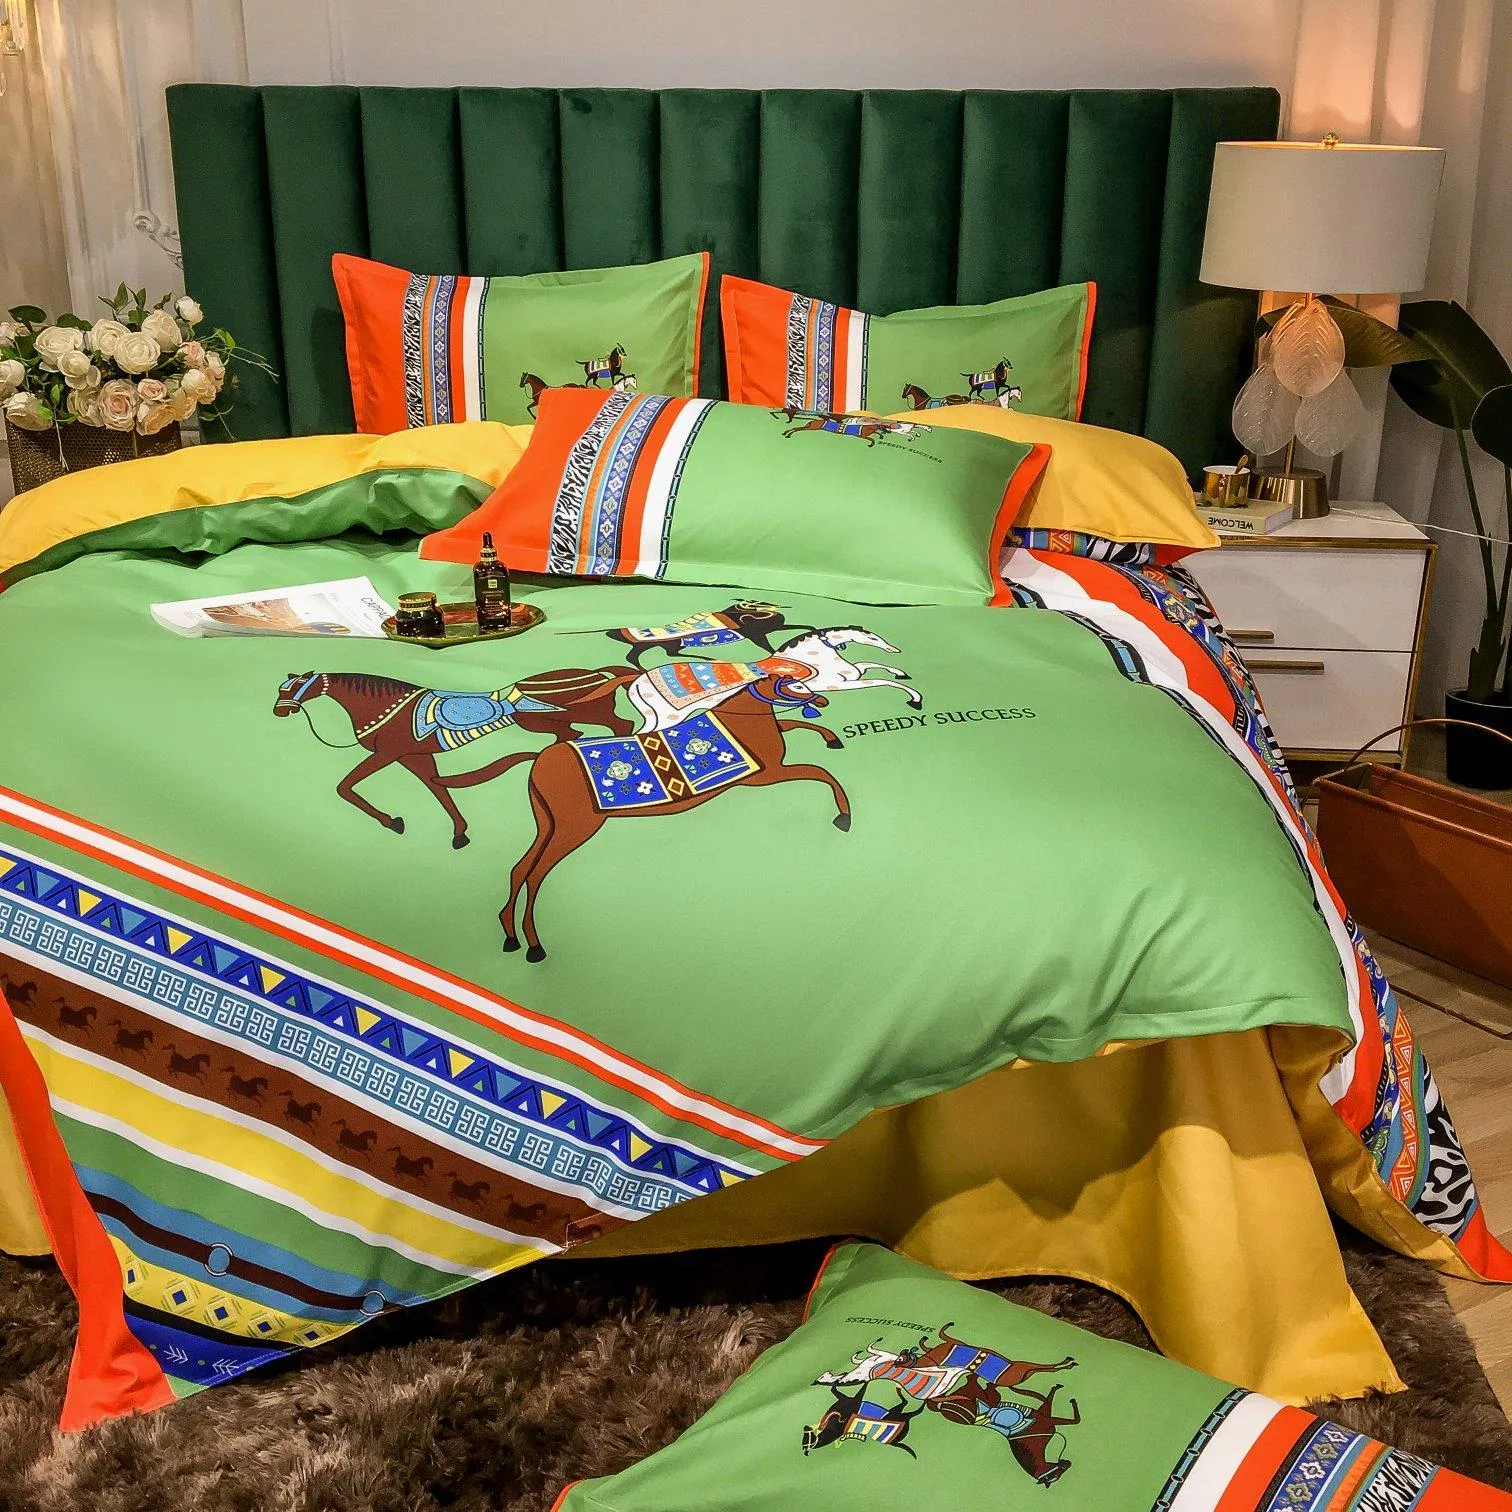 Green Designer Bedding Sets Duvet Cover Bohemia Fashion Printed Queen Size High Quality Luxury Comforters Set